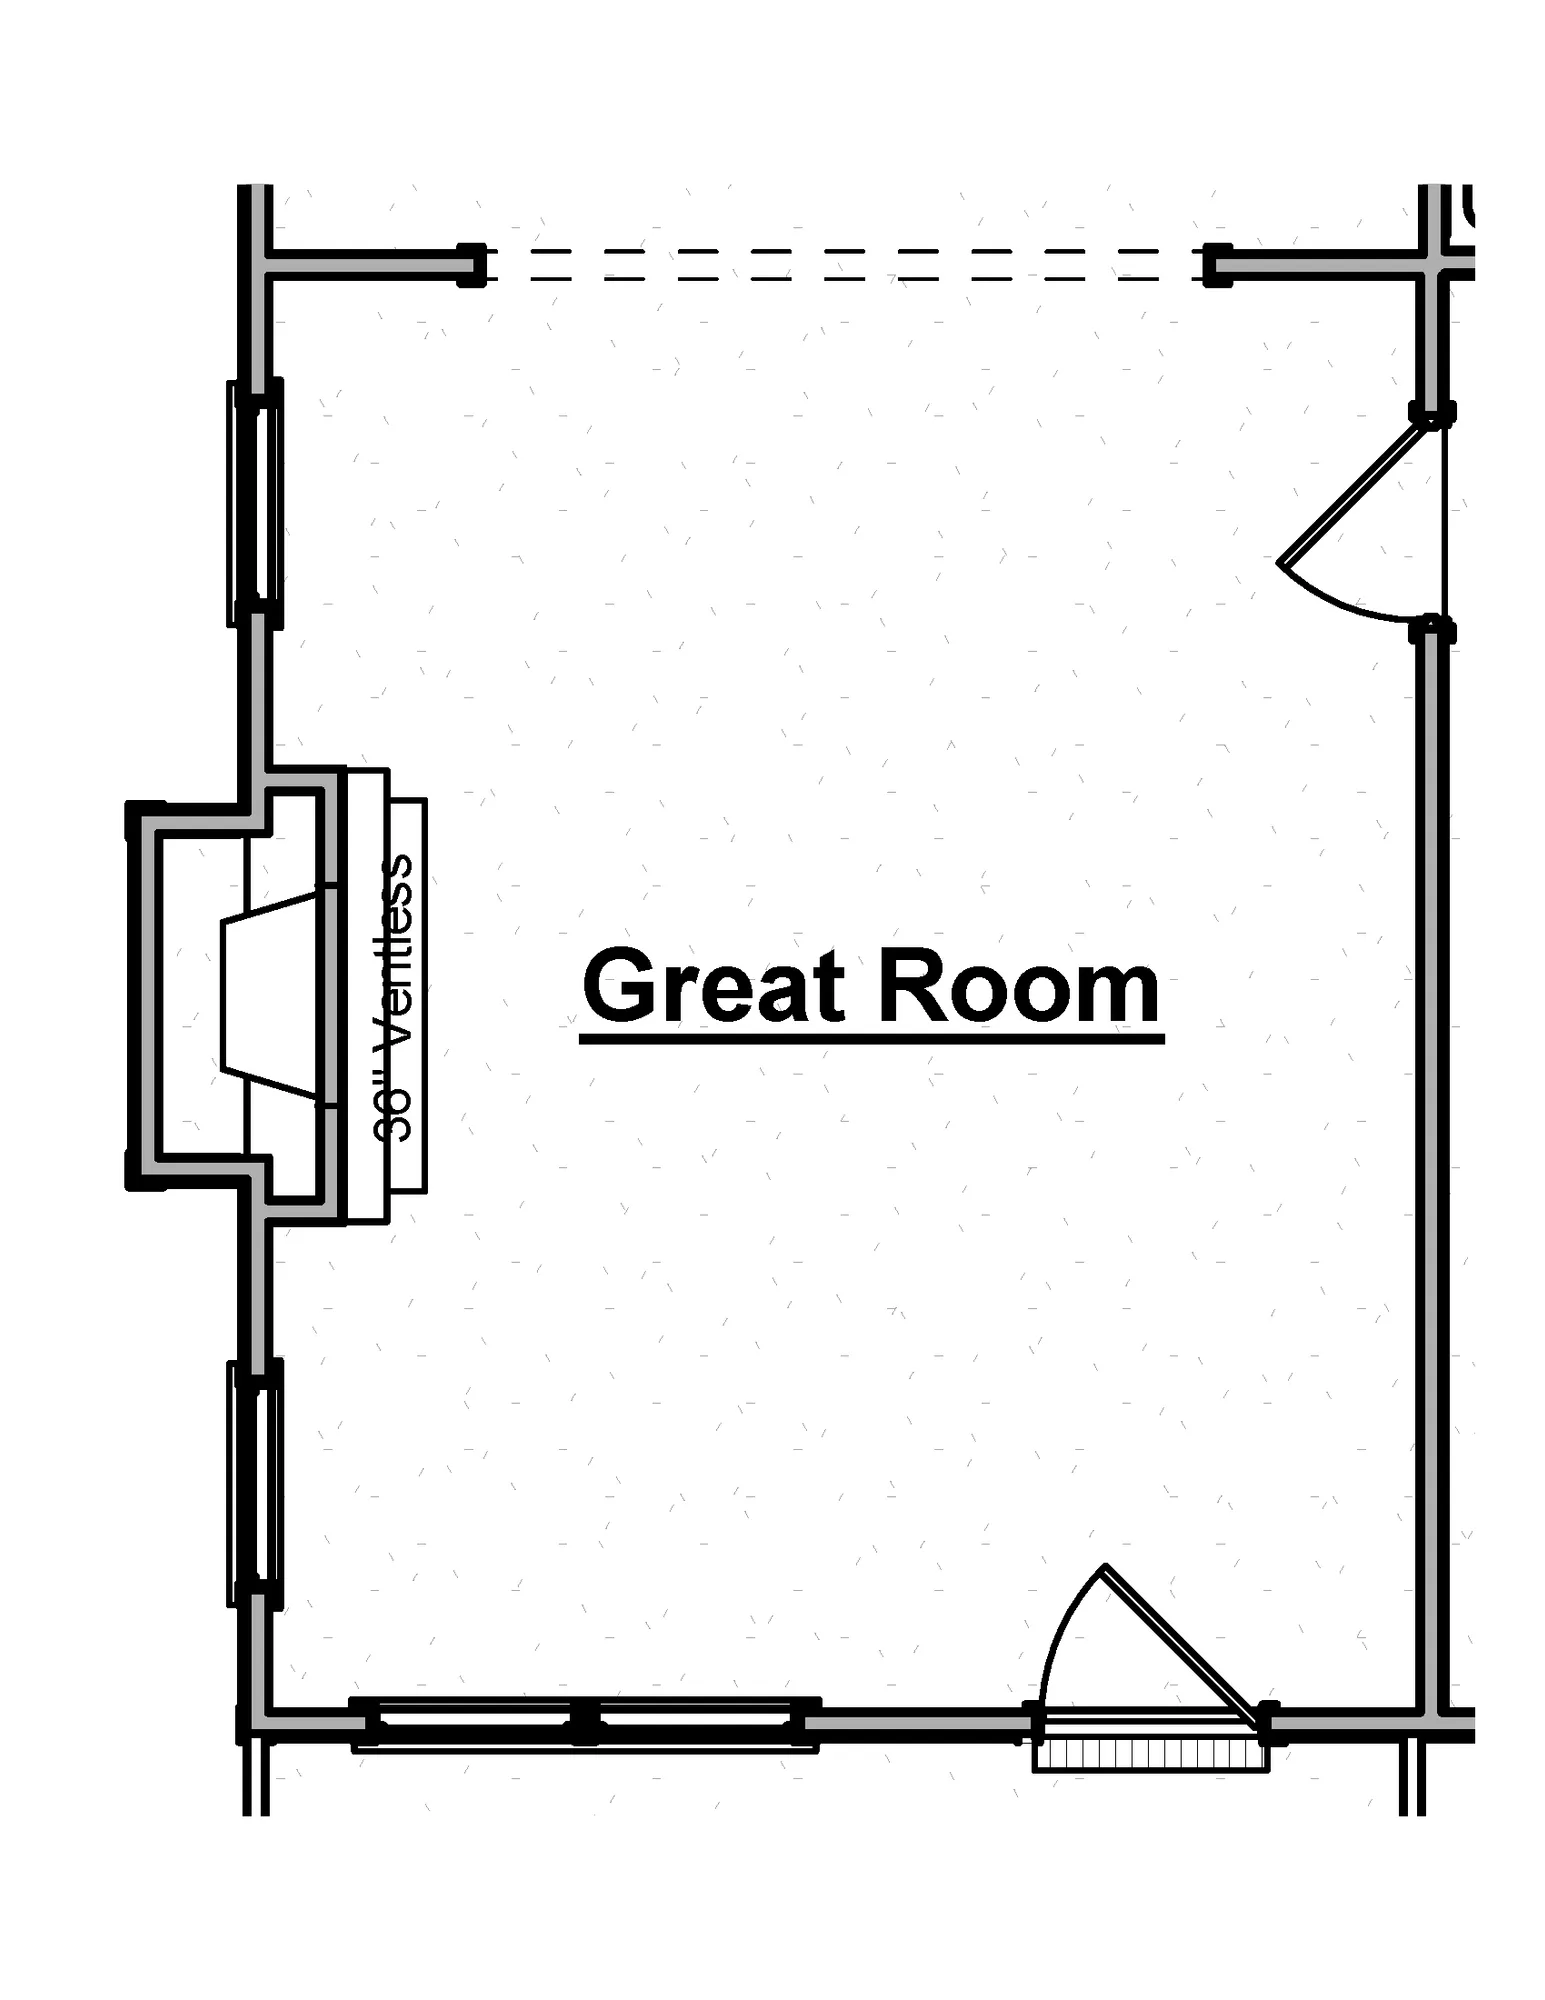 Great Room - Fireplace Bump-Out - undefined